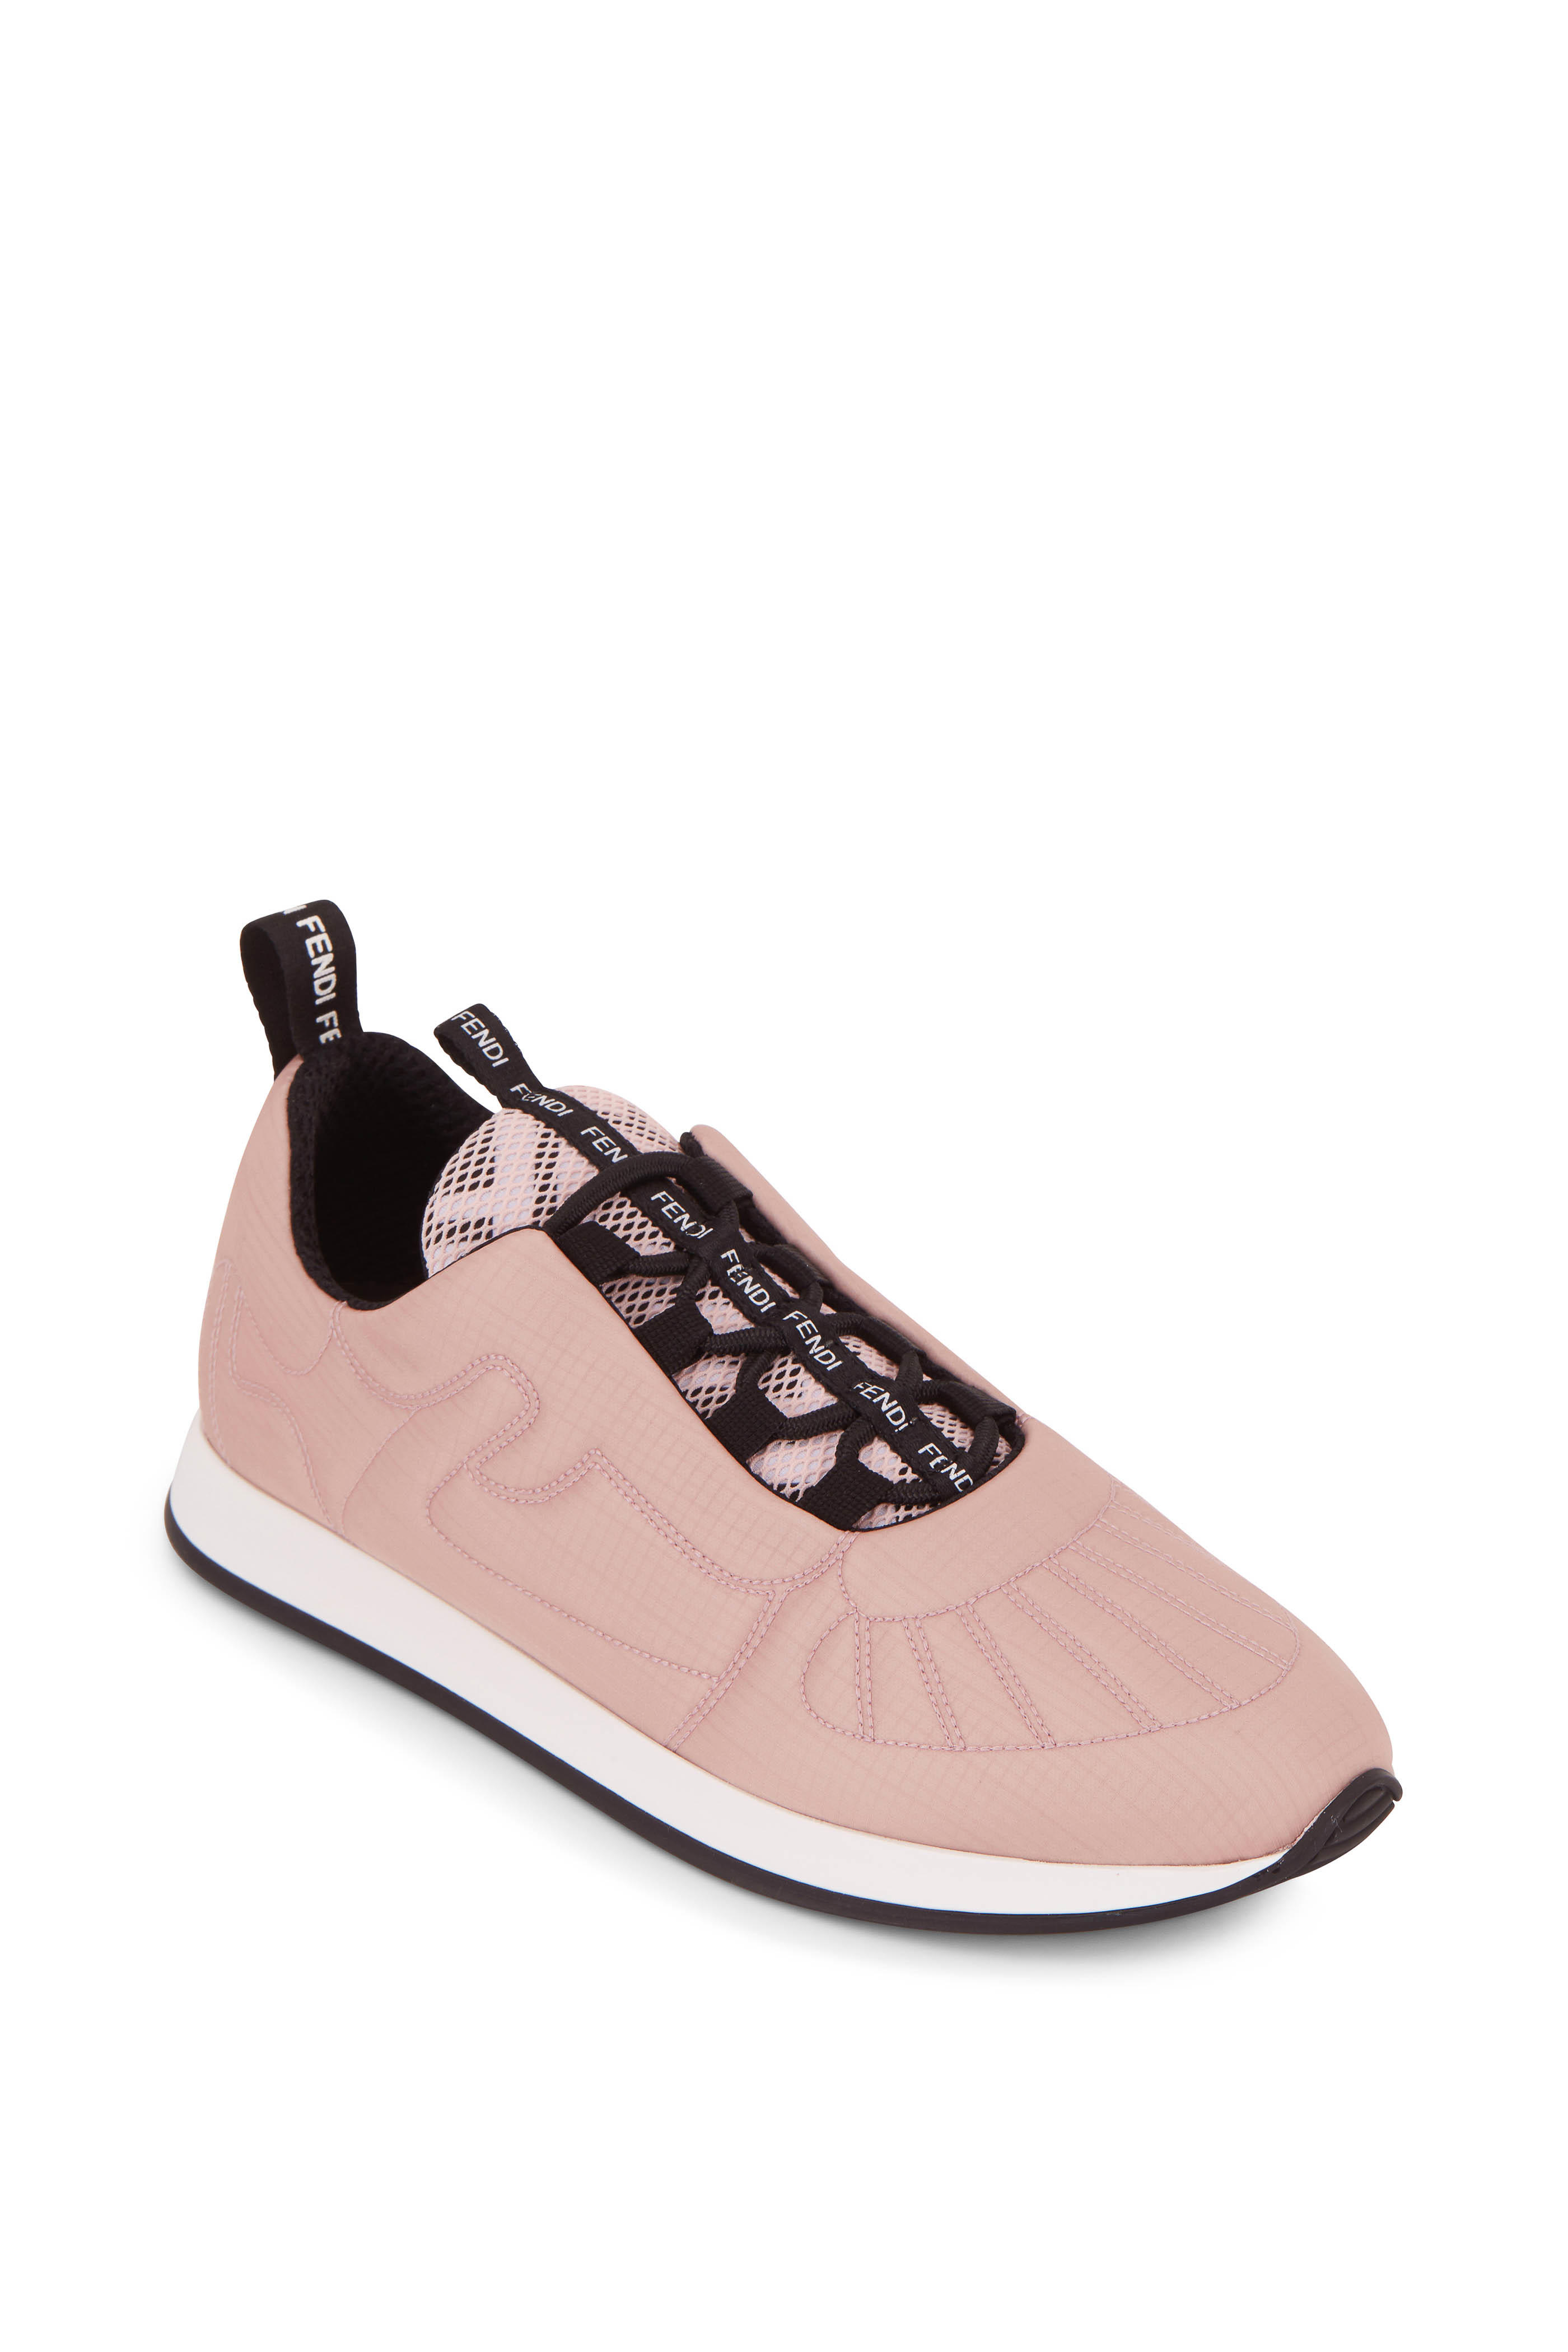 Fendi - FFreedom Pink Satin Quilted 